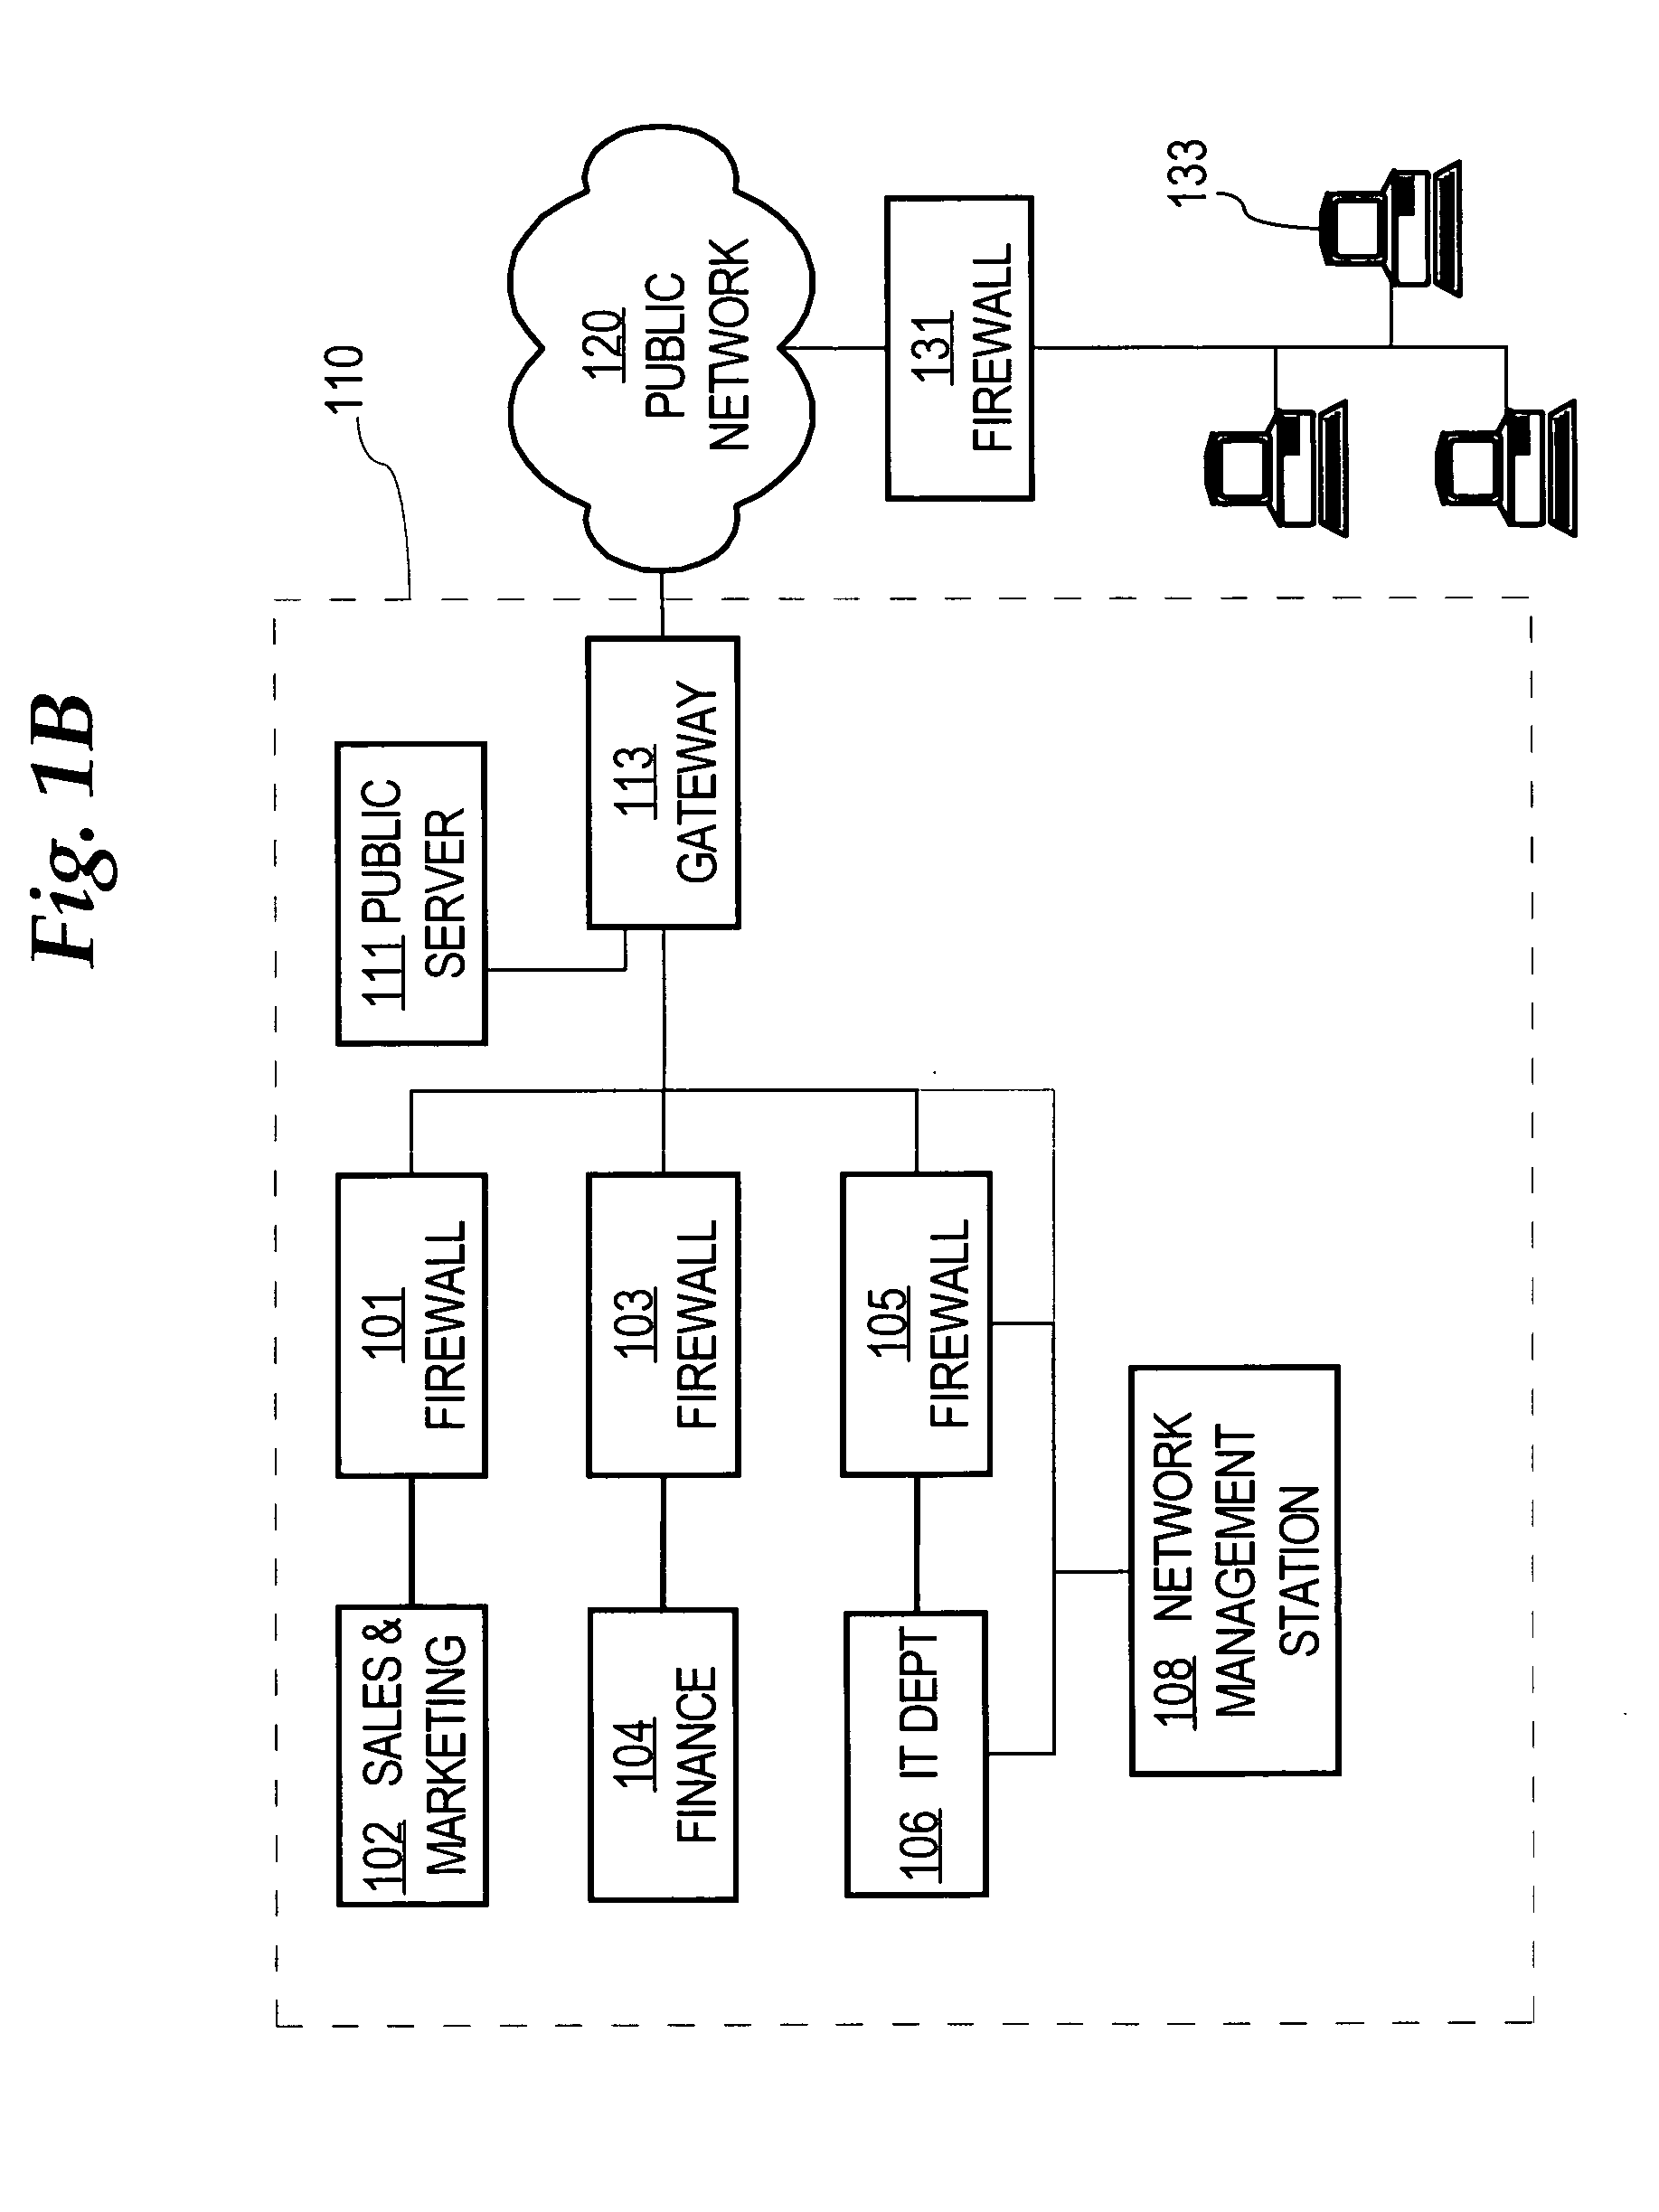 Method and apparatus for controlled access of requests from virtual private network devices to managed information objects using simple network management protocol and multi-topology routing